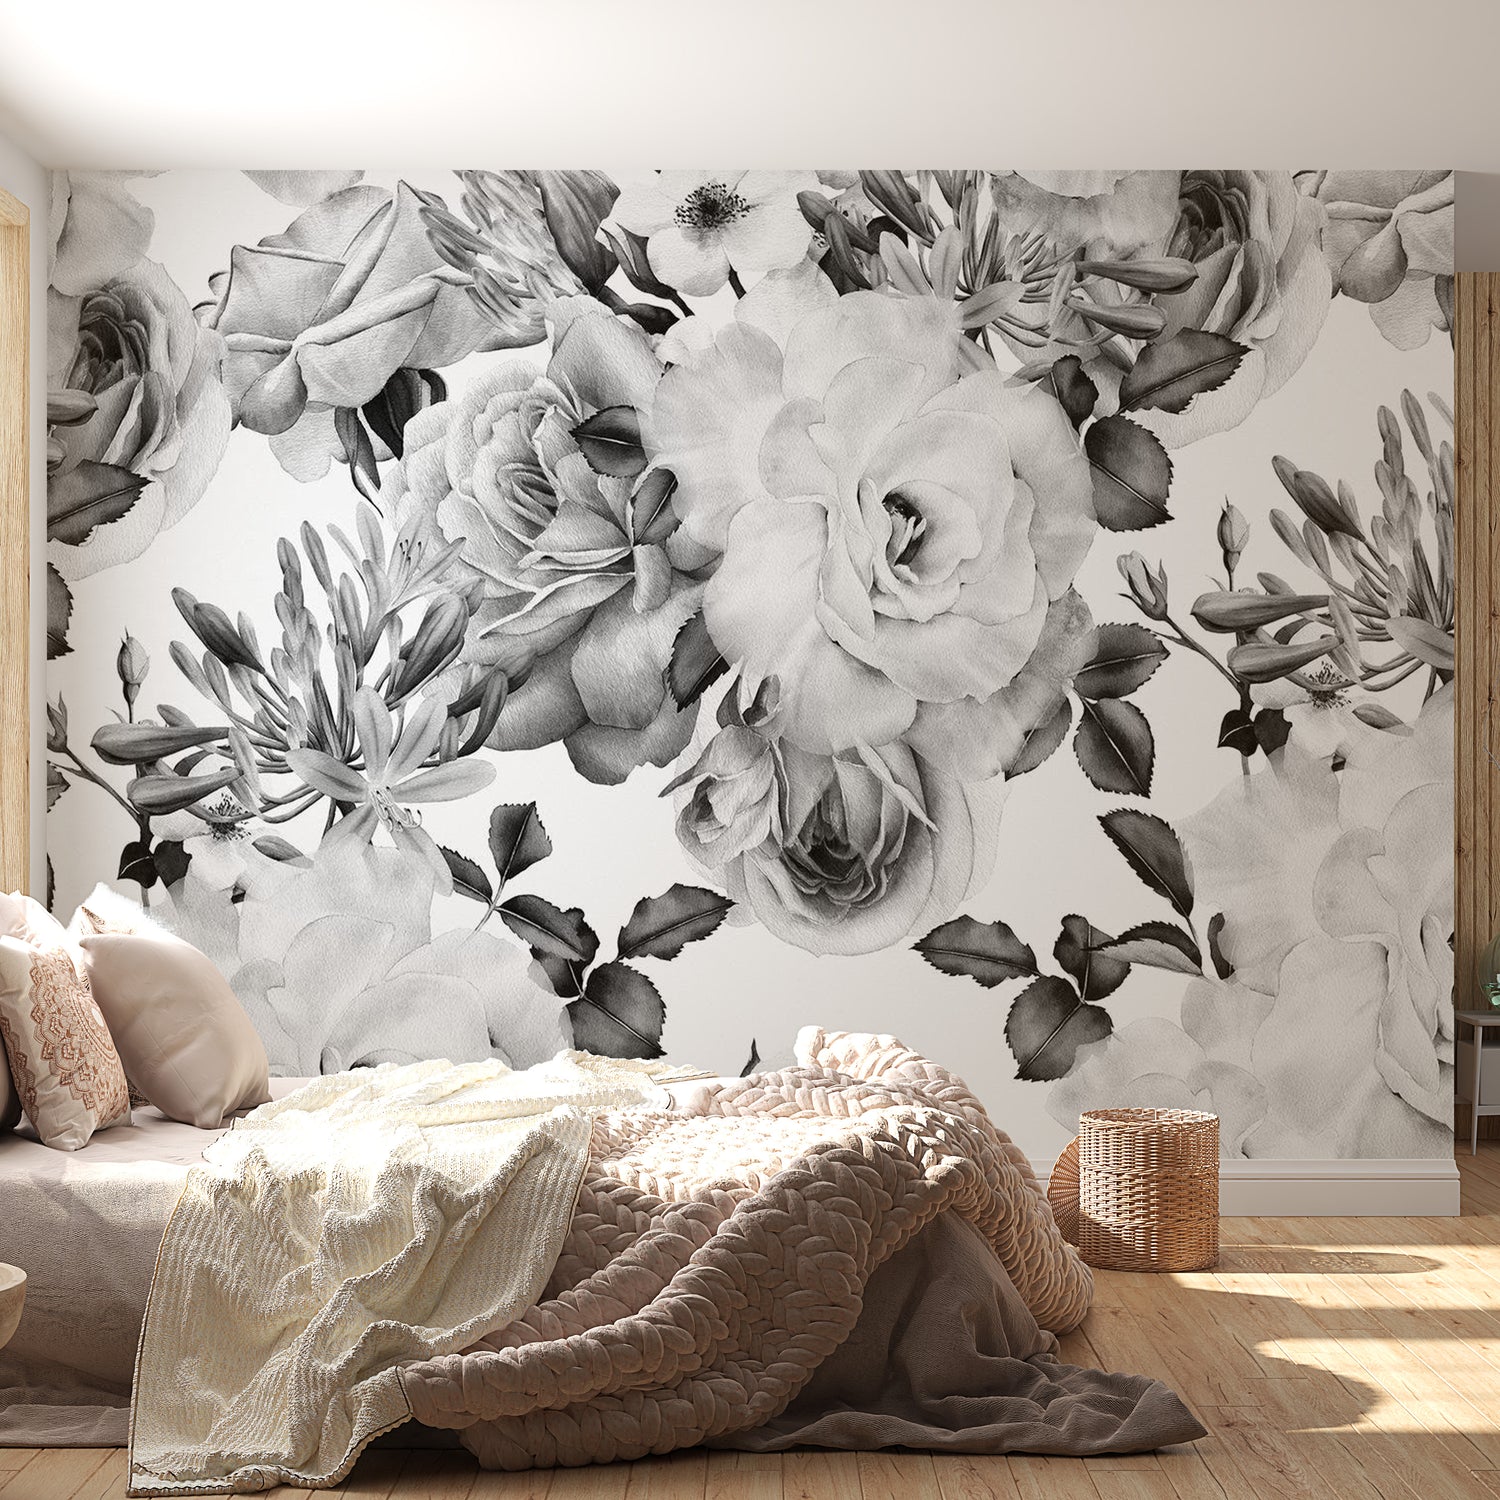 Peel & Stick Floral Wall Mural - Sentimental Garden Black And White - Removable Wall Decals